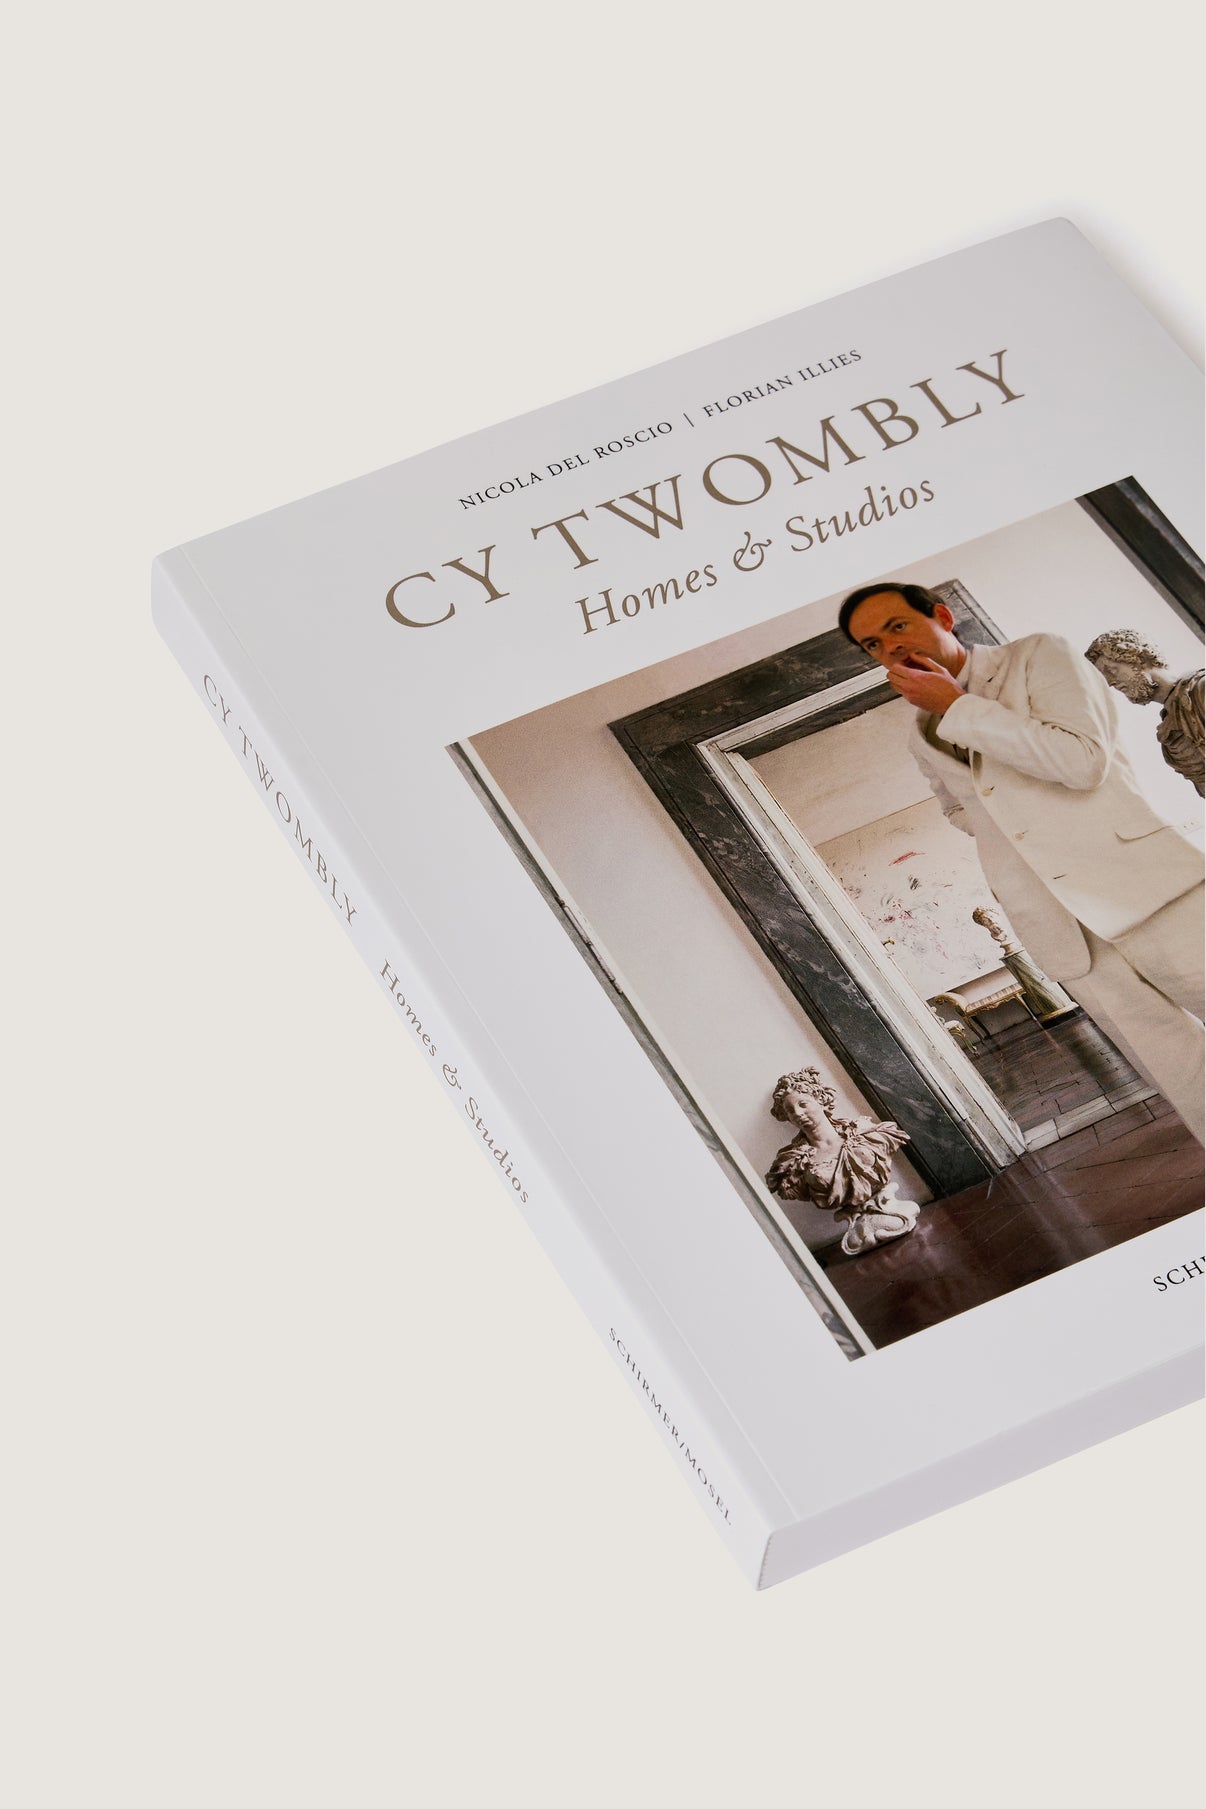 BOOK "CY TWOMBLY, HOMES AND STUDIOS" vue 2